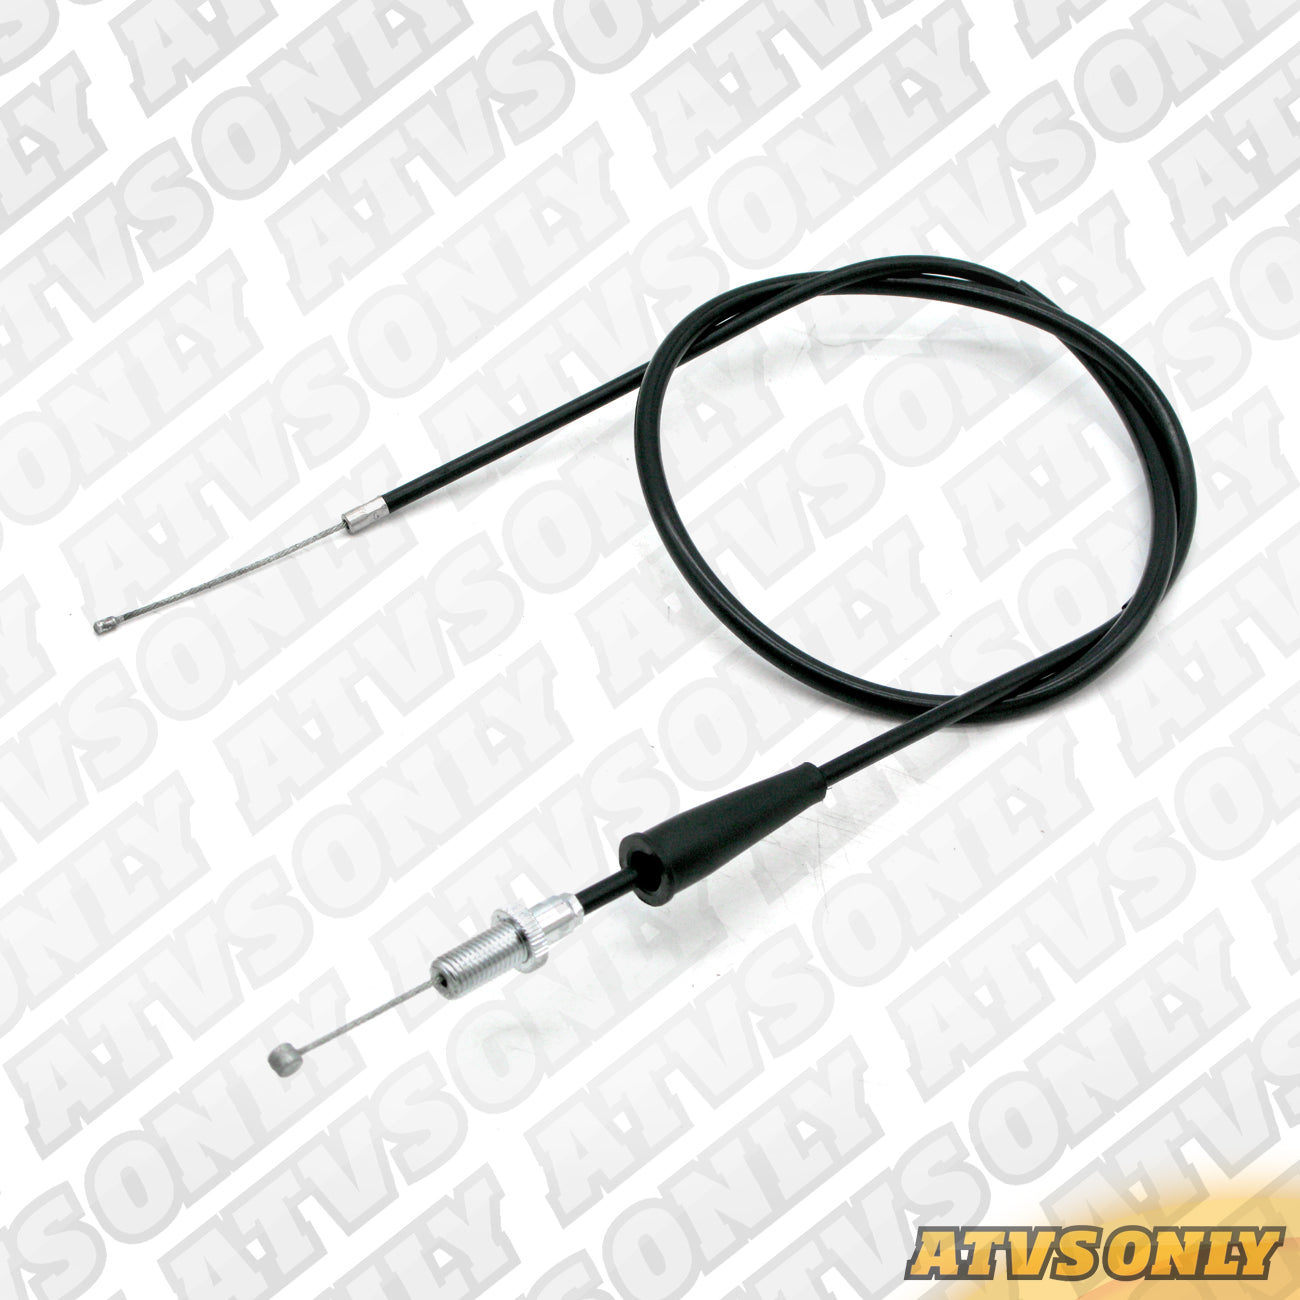 Cables – Replacement CR Pro Throttle Cable for Yamaha Blaster